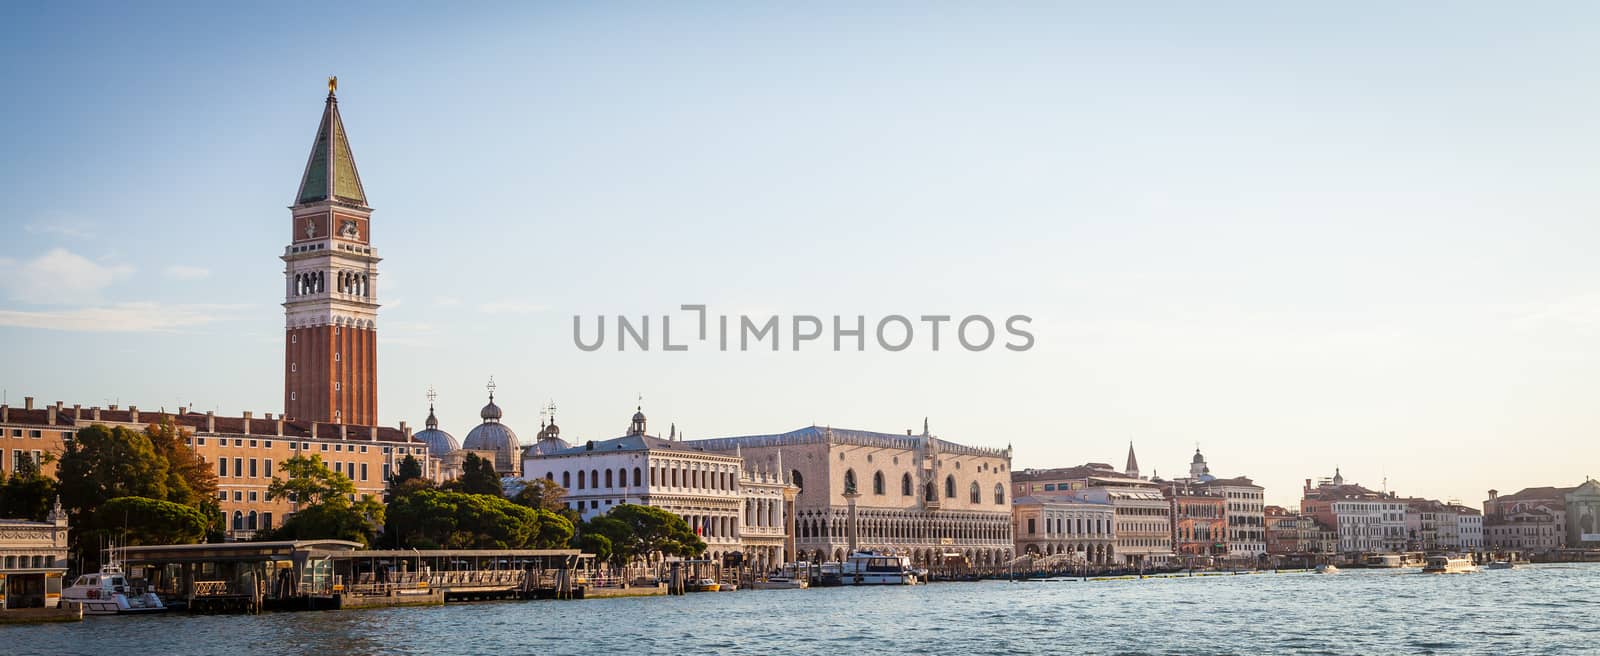 From Santa Maria della Salute point, one of the most spectacular point of view in Venice